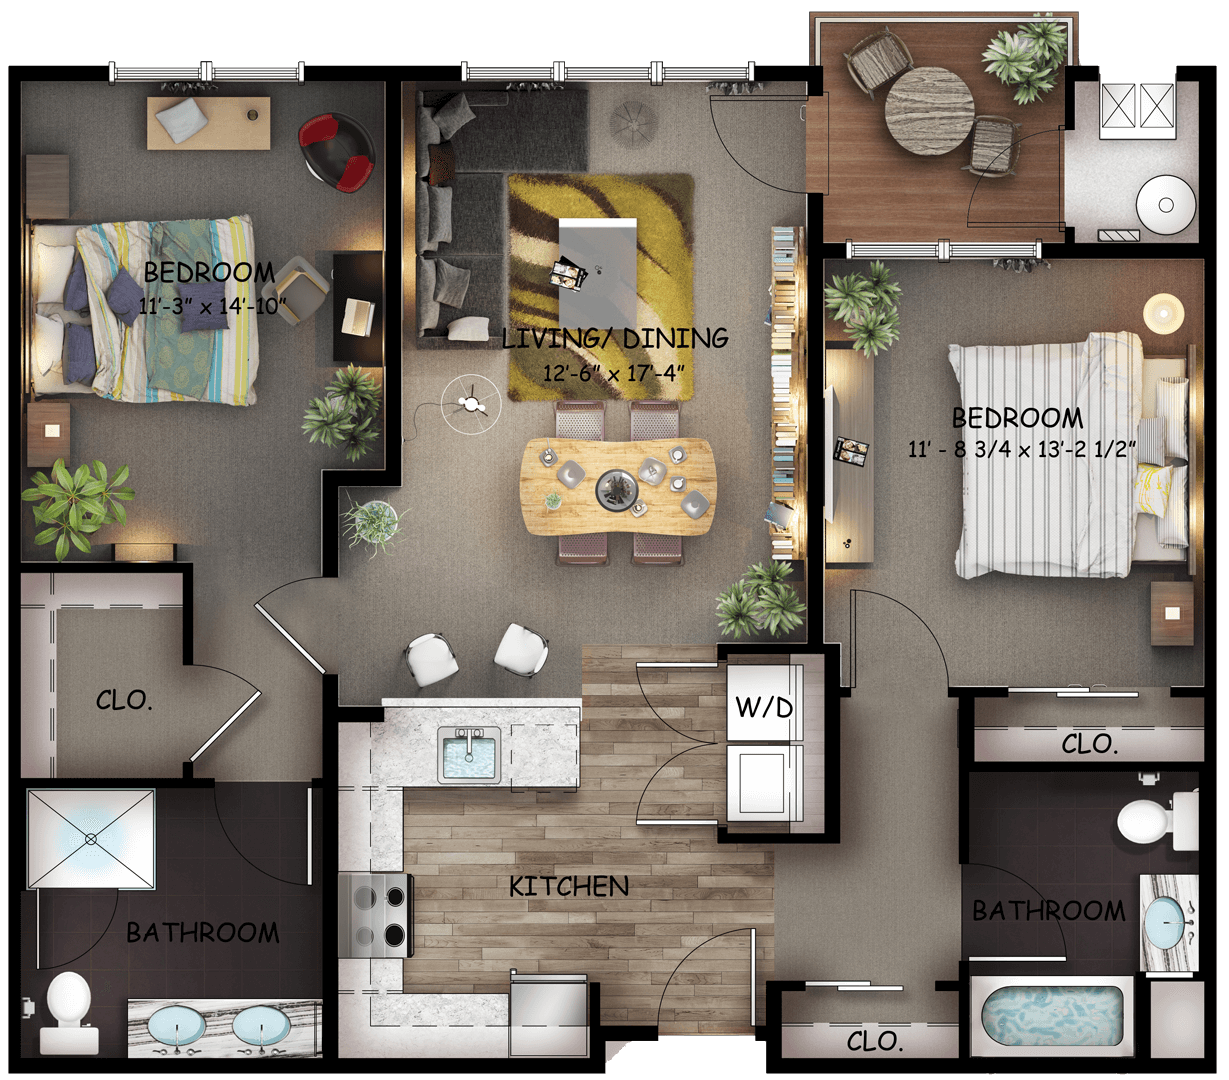 Floor plan of a two bedroom apartment with office space in North Jersey